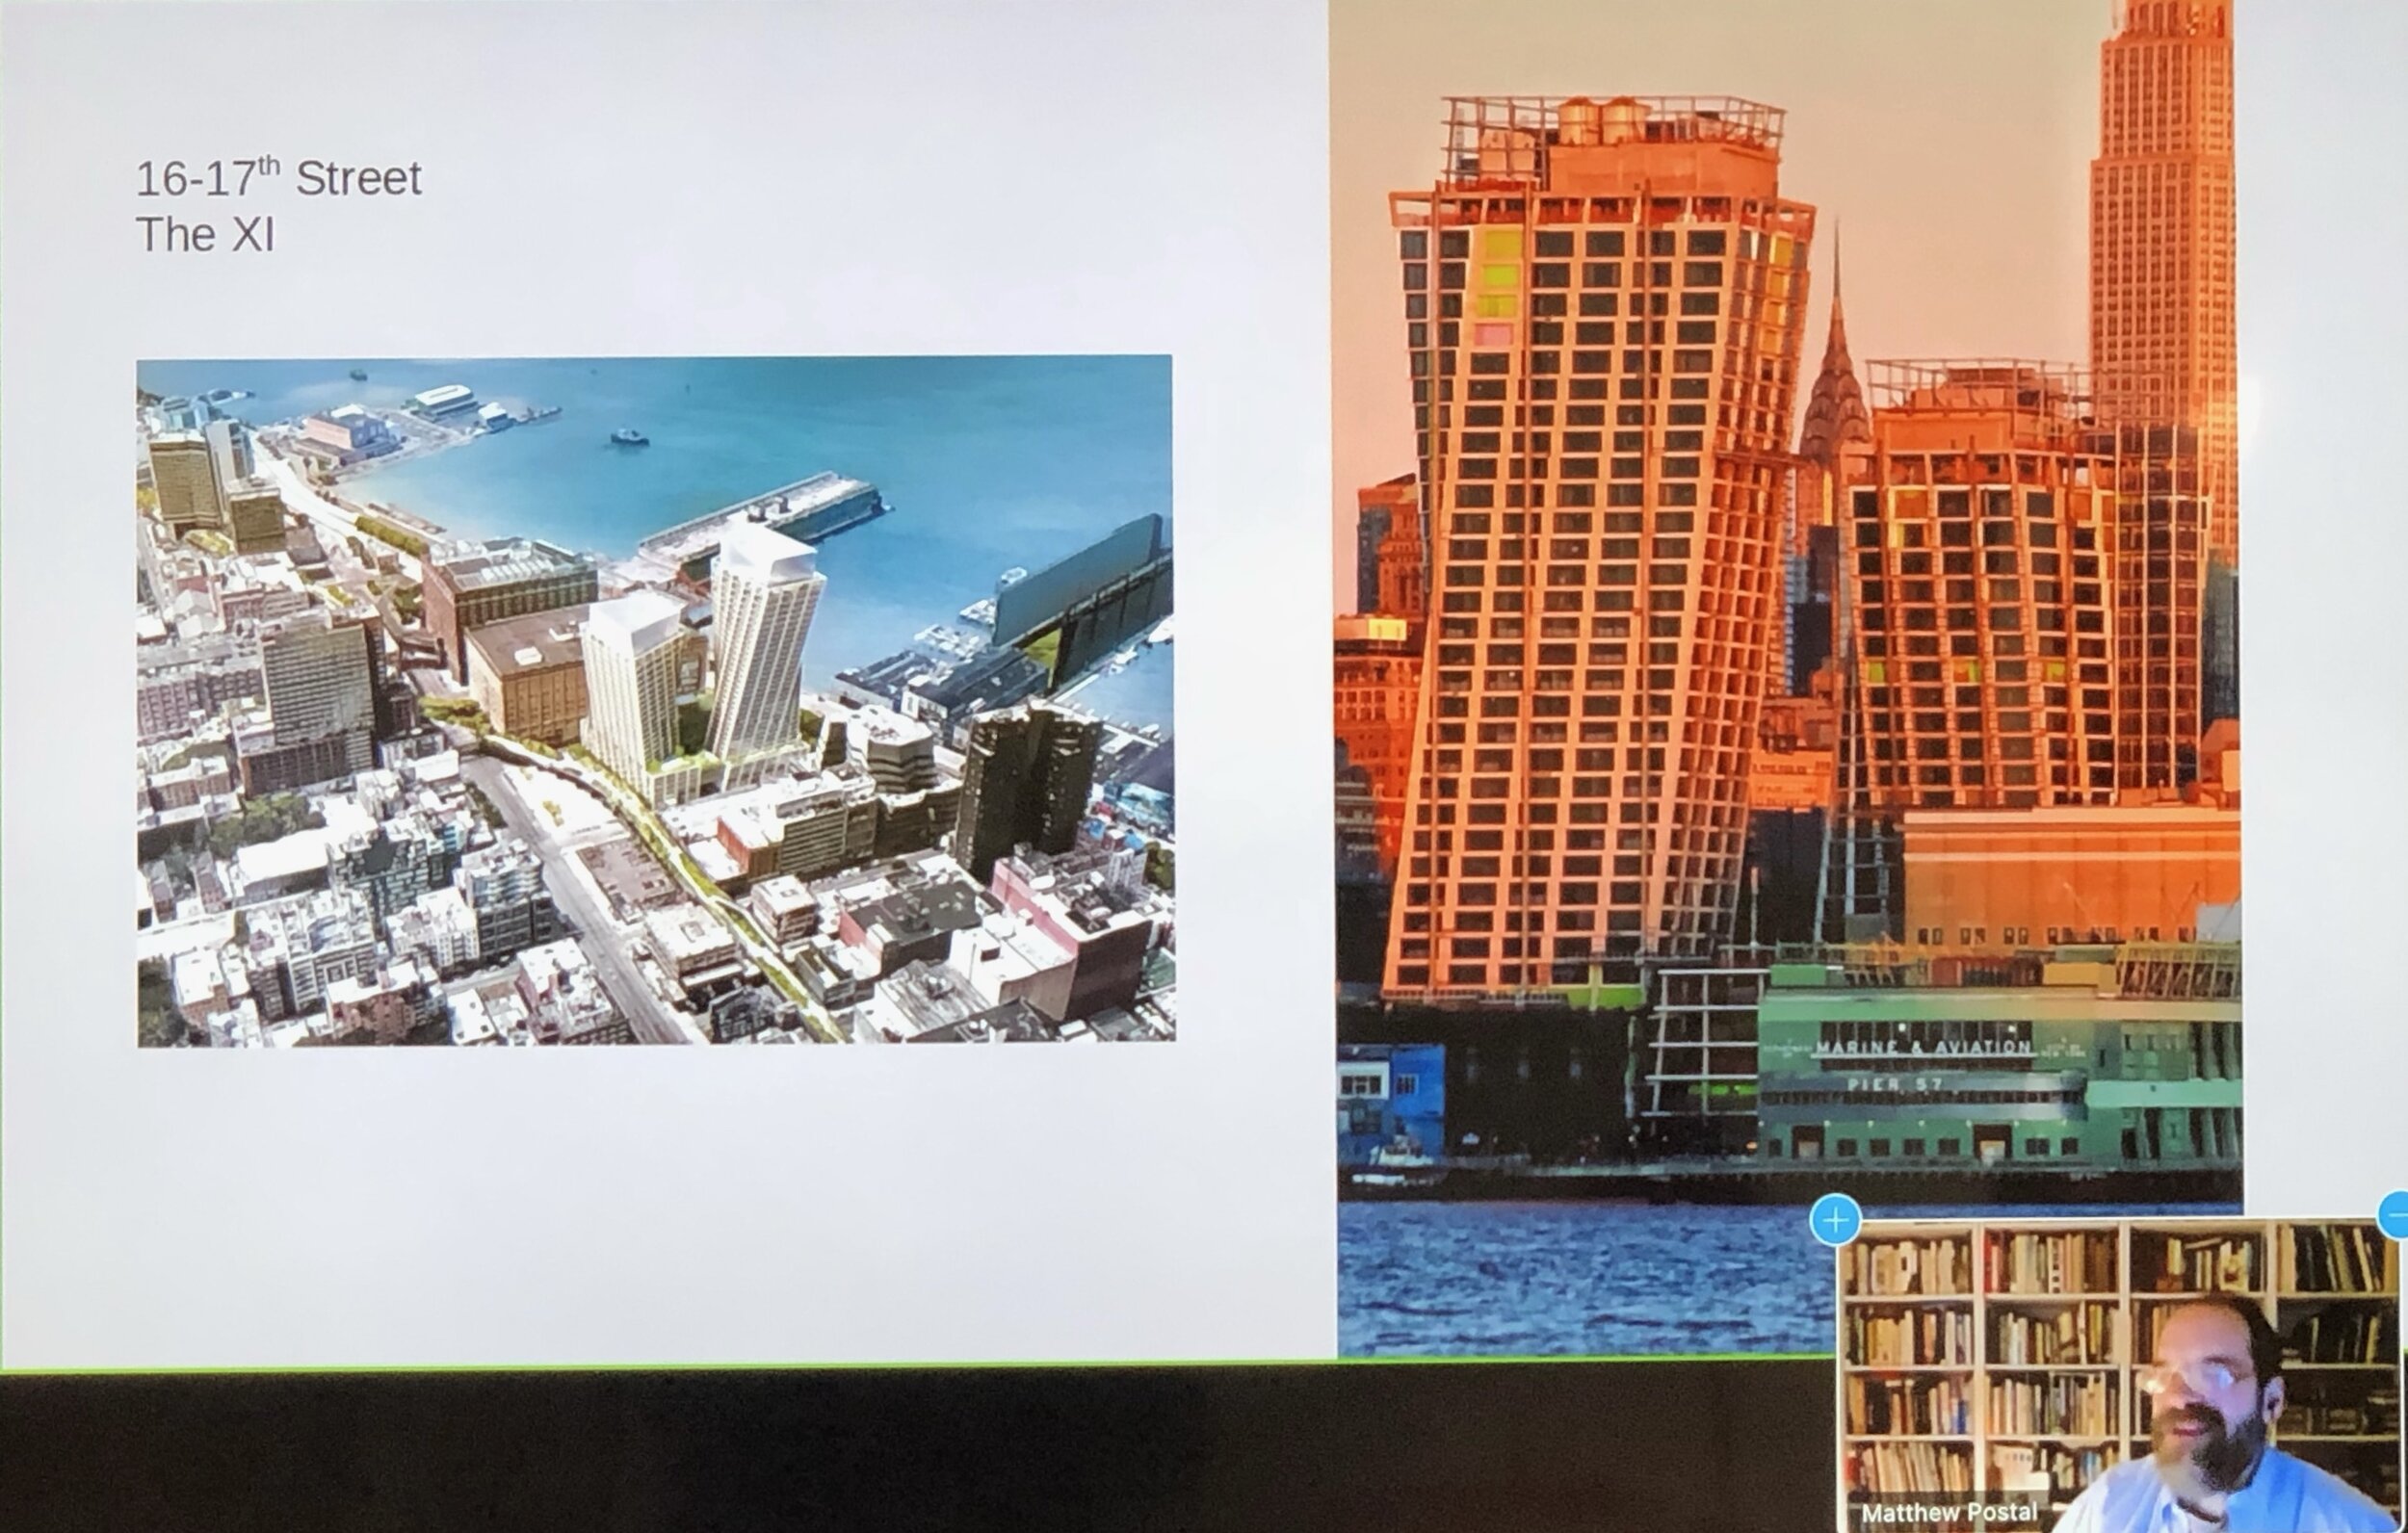 A MASNYC presentation, "West Chelsea, Revisited" with Matt Postal.  Matt is withholding judgement on these new buildings until after the windows are washed.